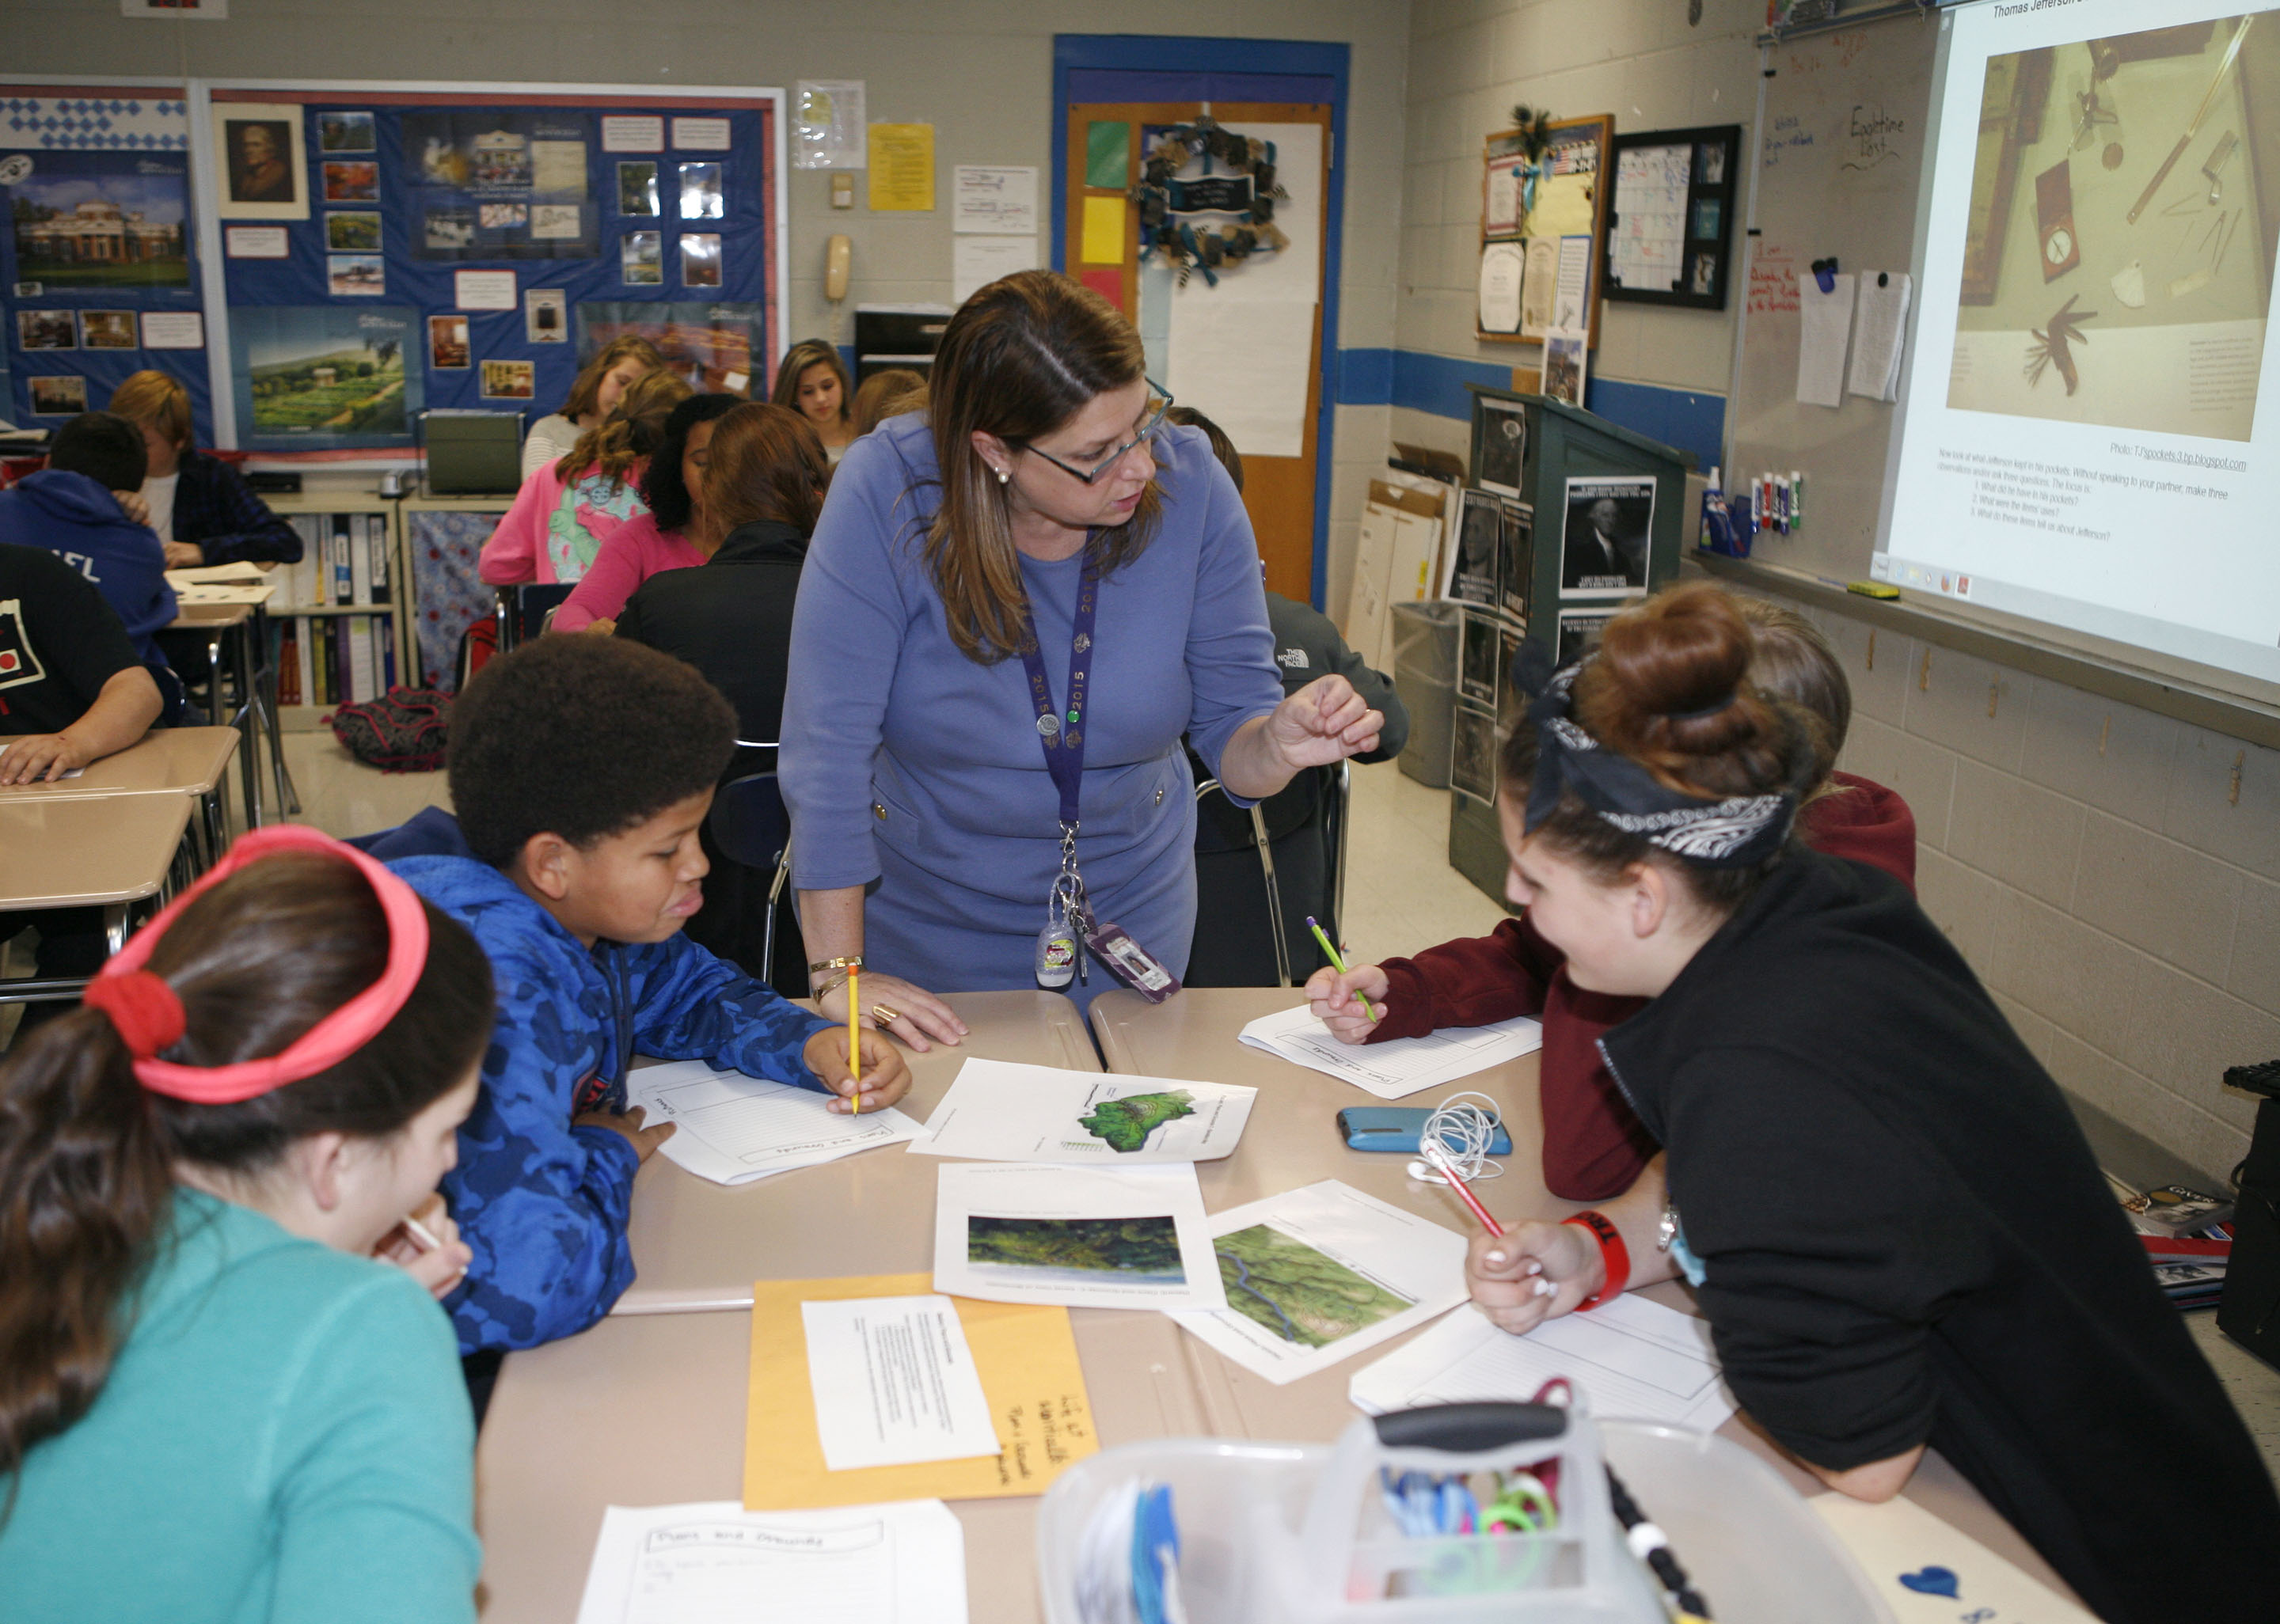 Lincoln County Middle School teacher Rachael Yaden gives instructions to students Faith Godby, Bryston Alcorn, Faith Brock and Raelyn Barnes, left to right, during an inquiry lesson on life at Monticello, Thomas Jefferson’s home, in her 8th-grade social studies class. Photo by Mike Marsee, Nov. 16, 2015